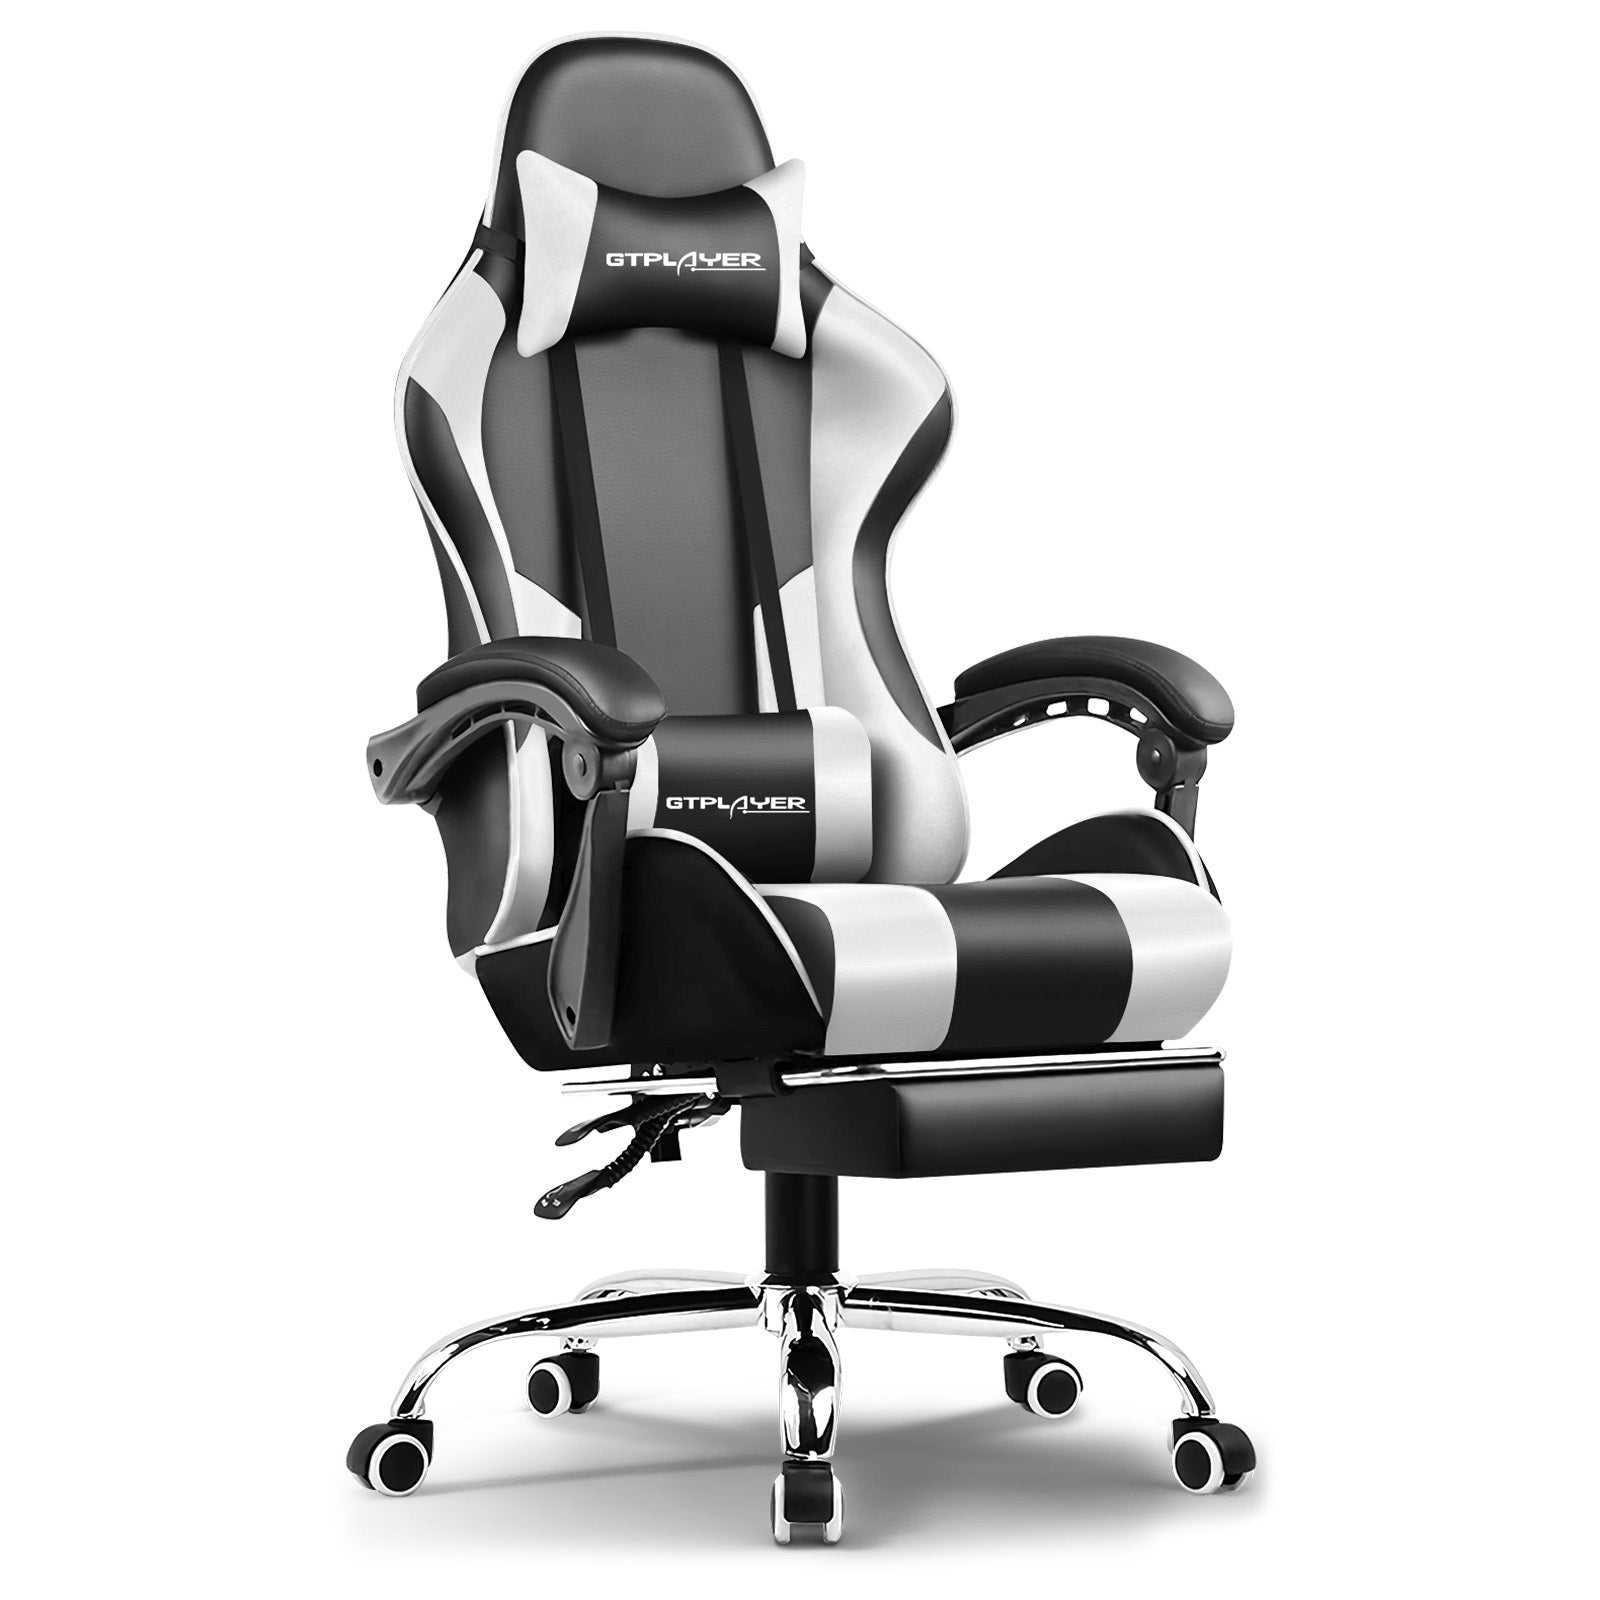 Footrest Series GT800A - GTRACING